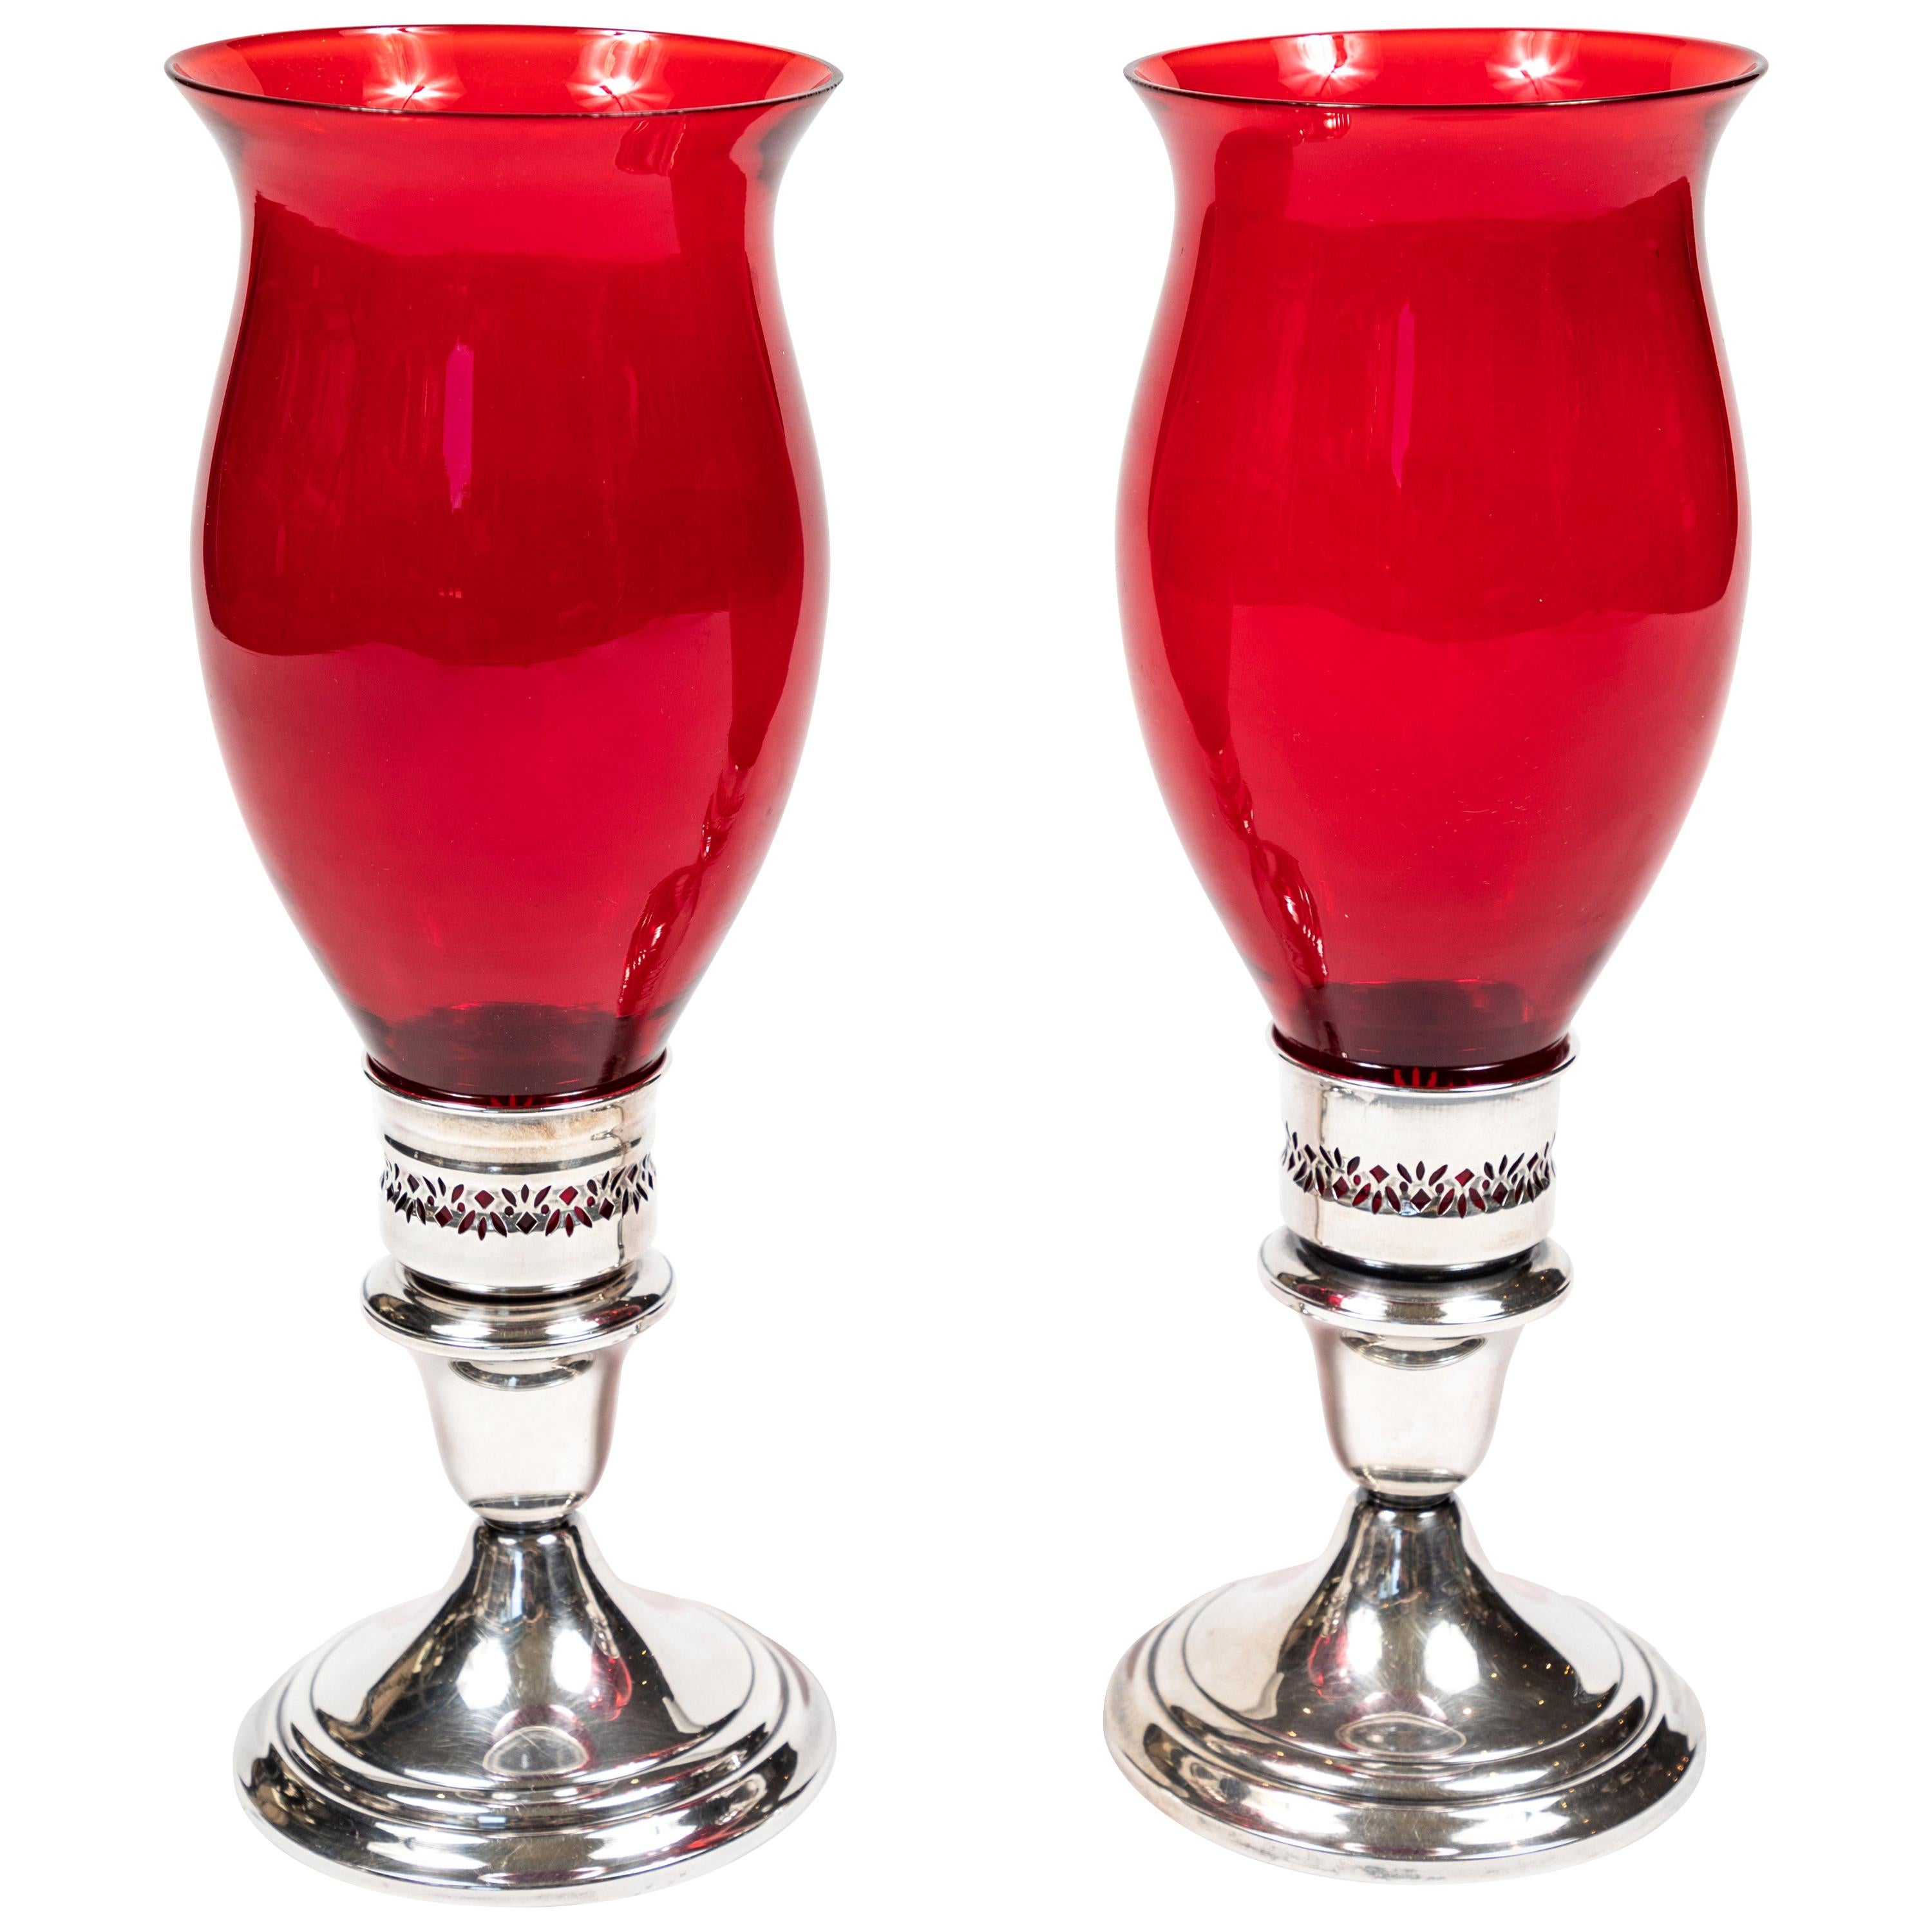 Pair of Vintage Gorham Silver Plate Candlesticks with Ruby Red Glass Hurricanes